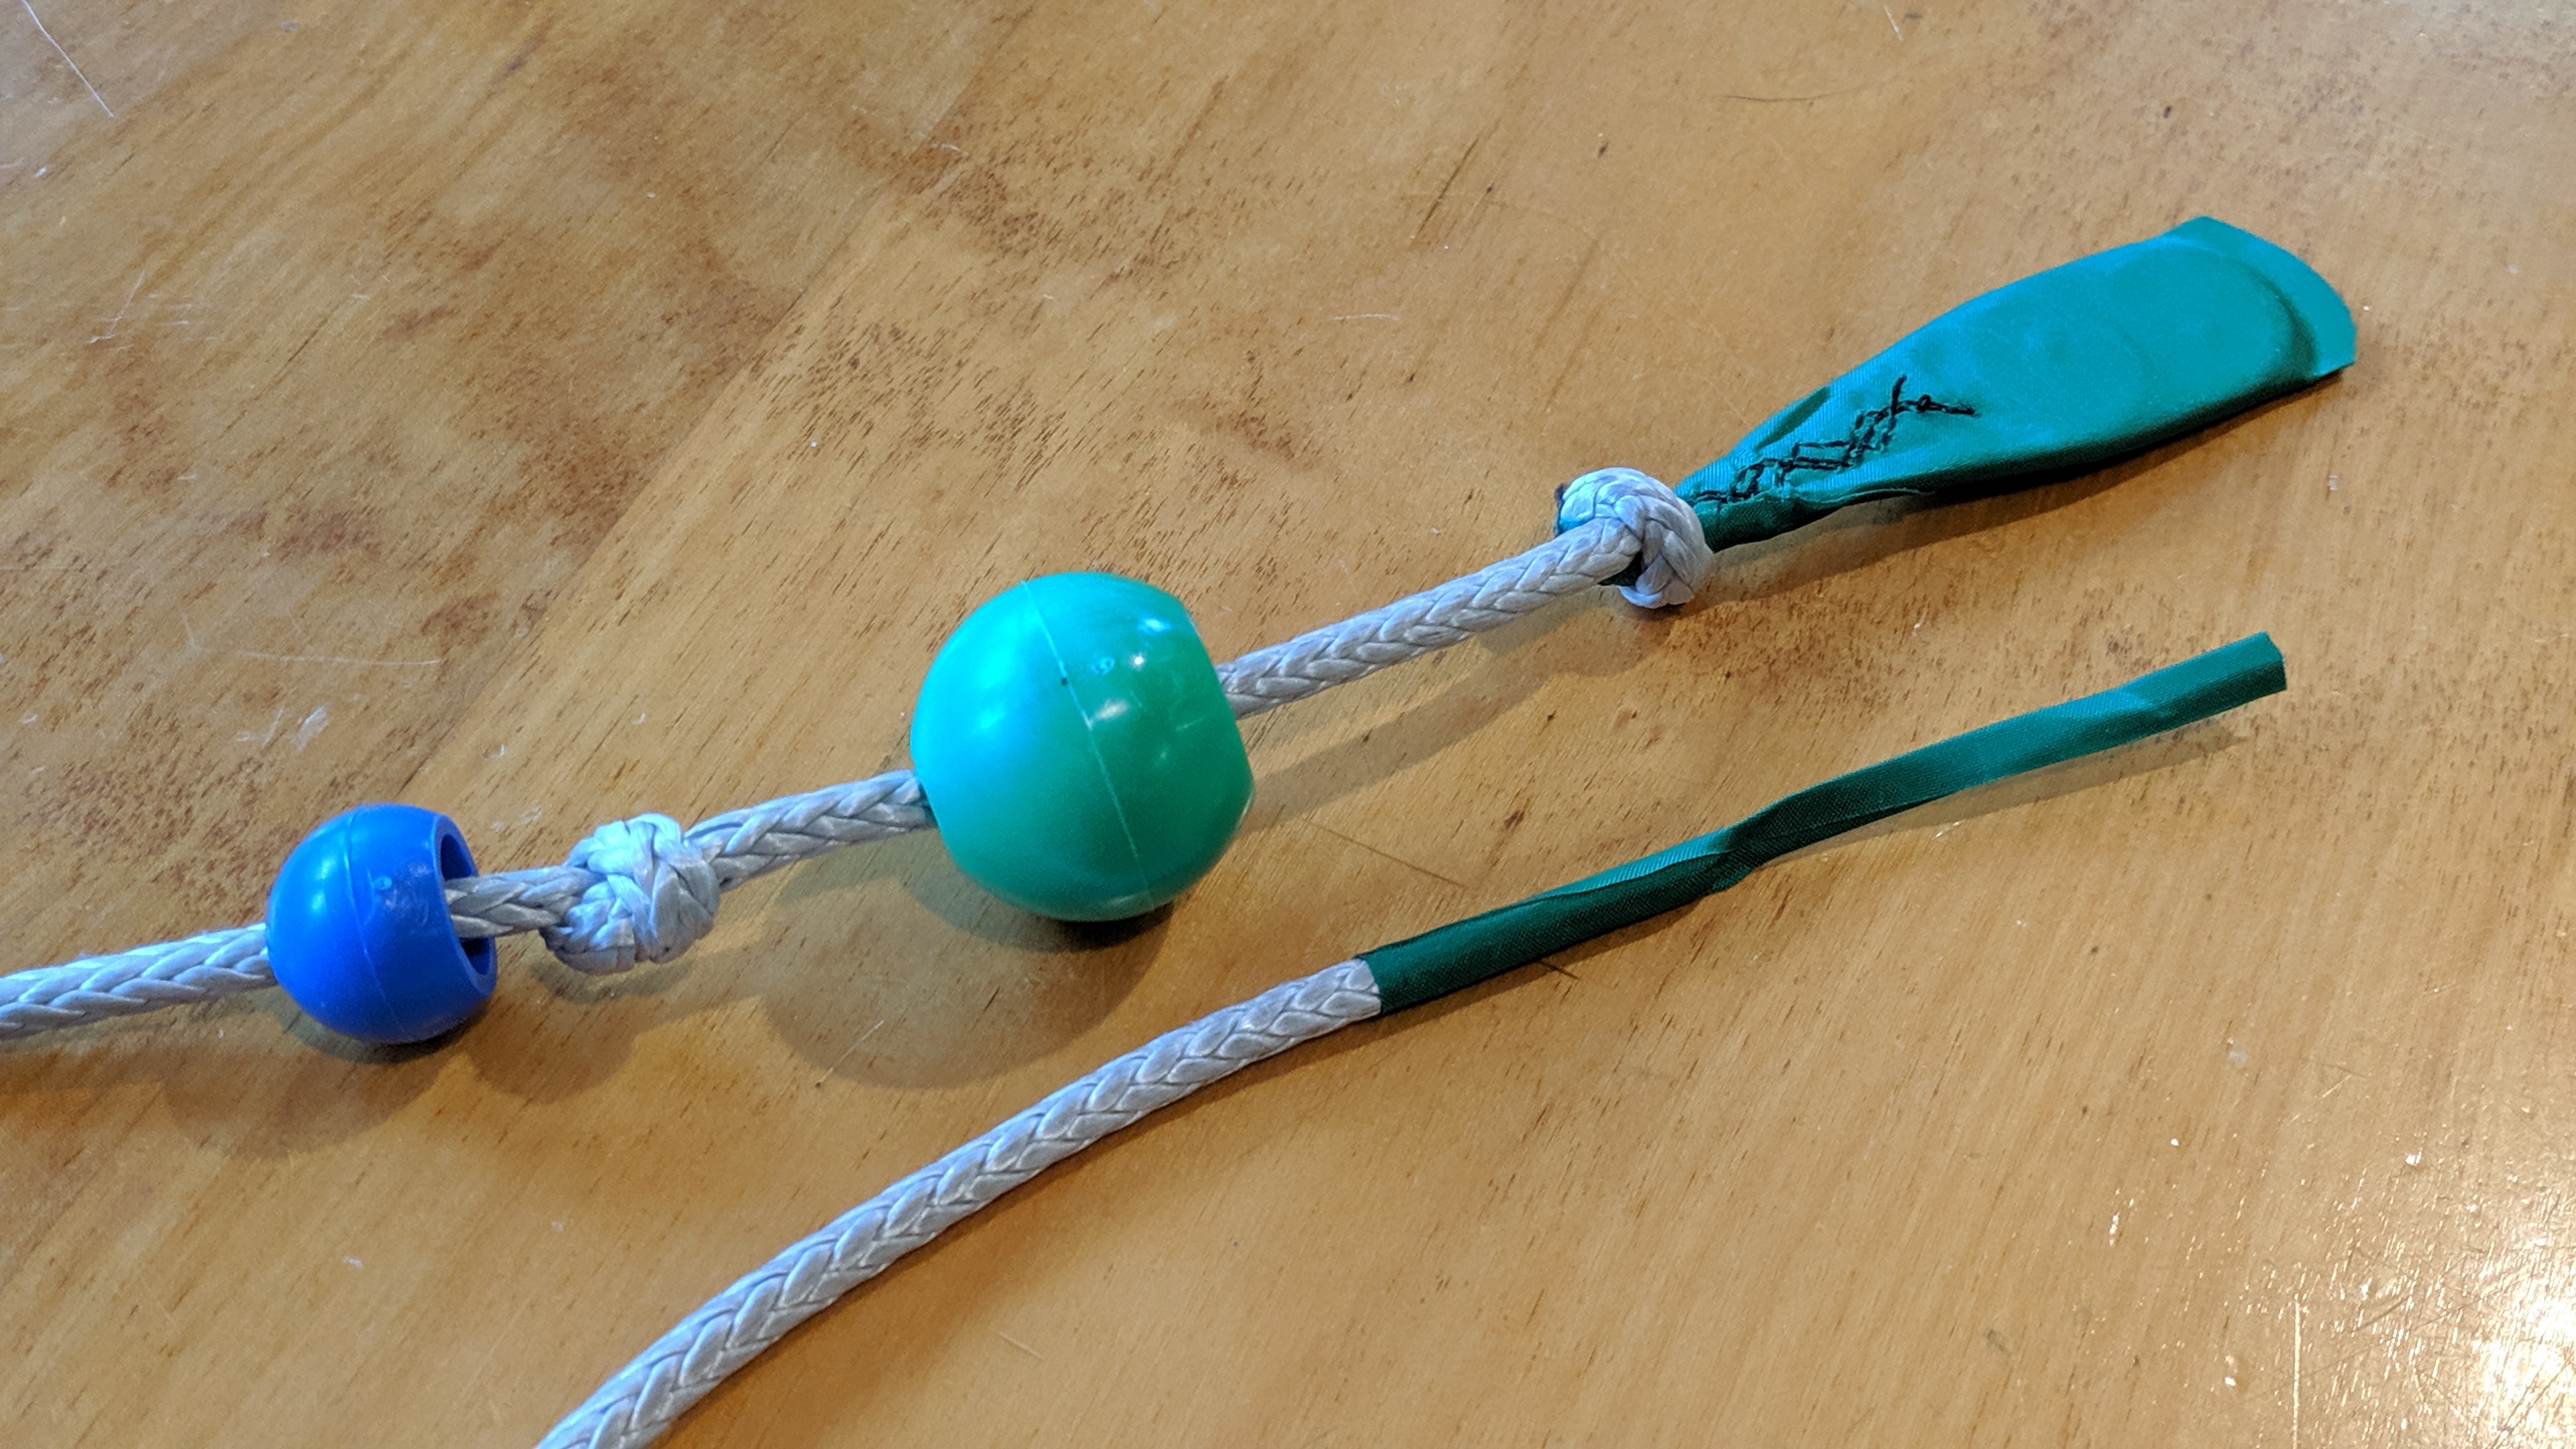 Grip end of the trim line with balls offset to show knots (above) and thread end (below)